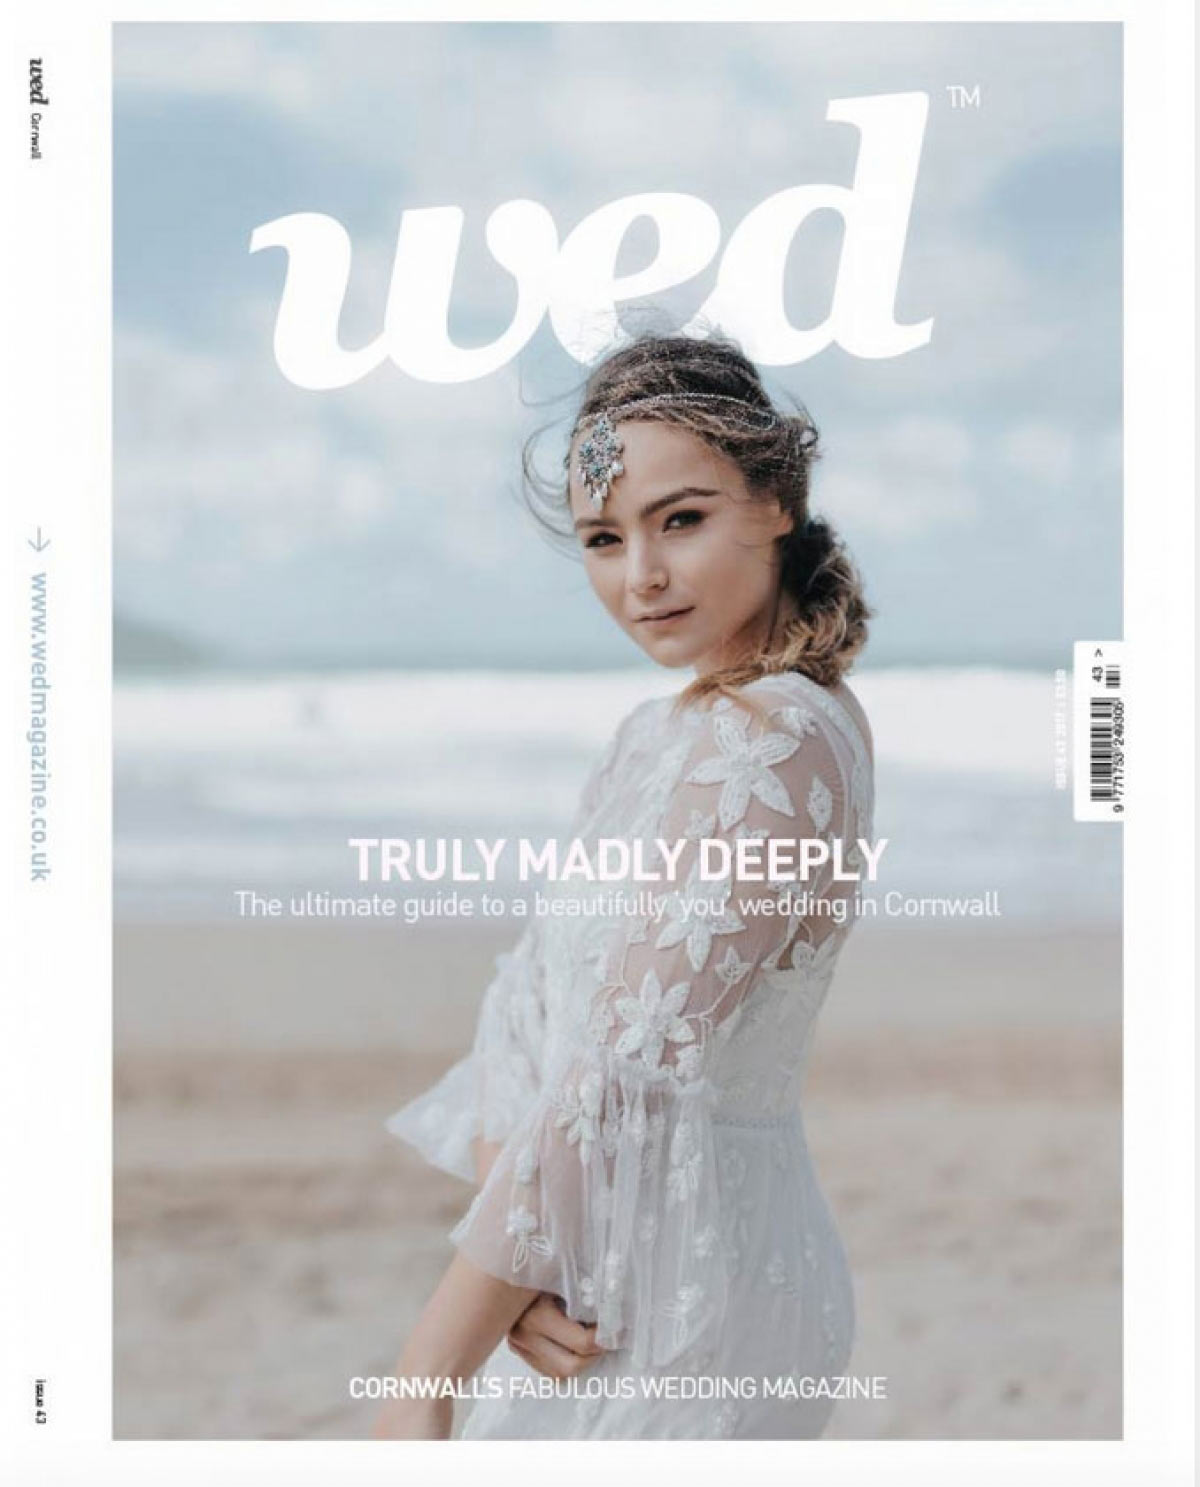 New Wed Cornwall out now!